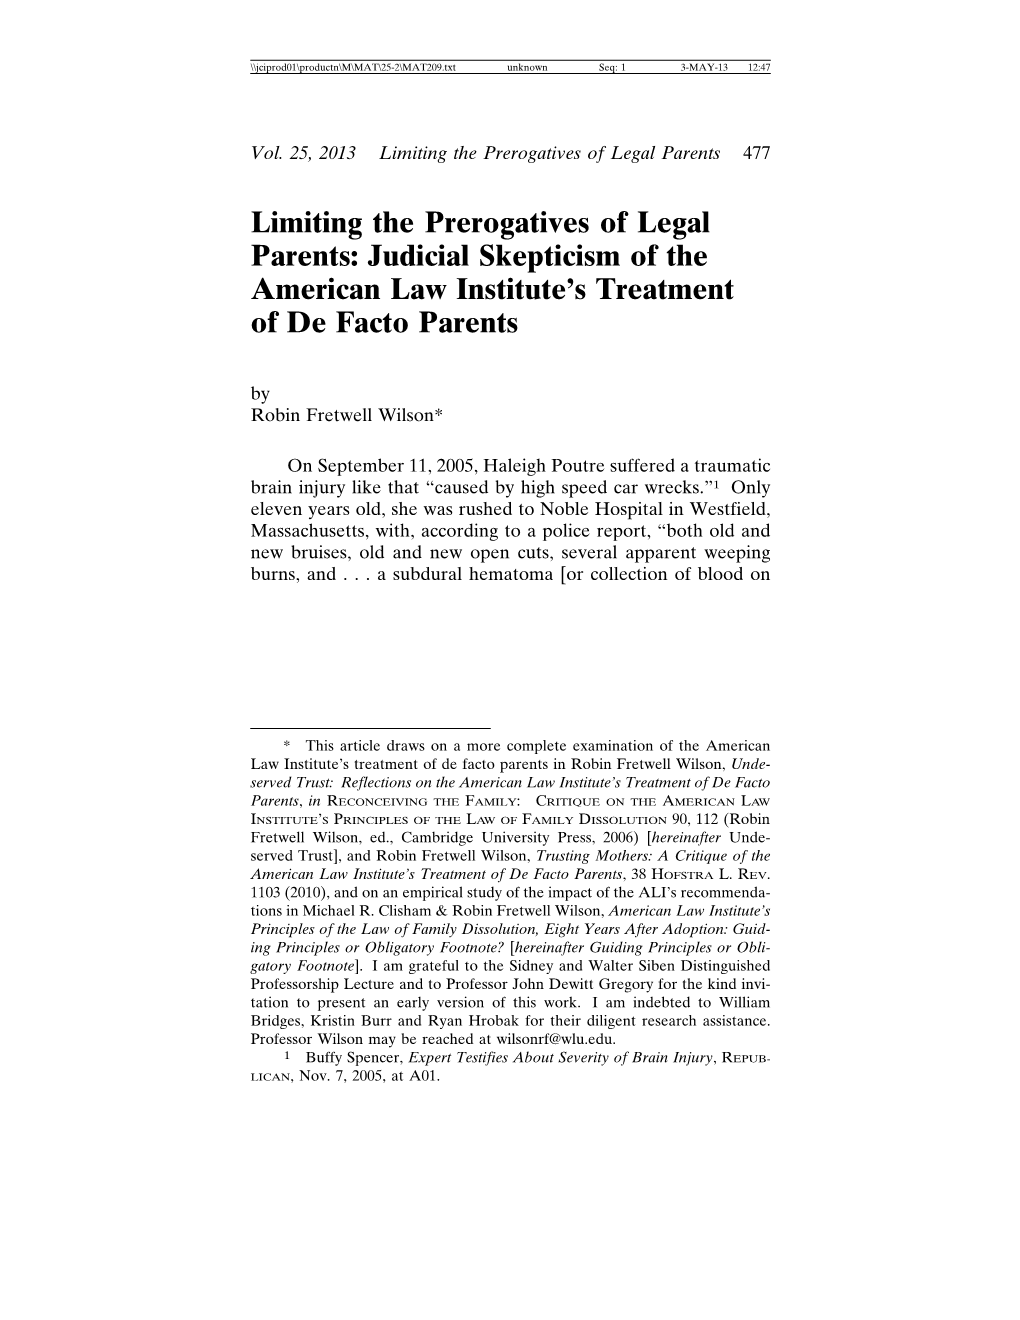 Limiting the Prerogatives of Legal Parents: Judicial Skepticism of the American Law Institute’S Treatment of De Facto Parents by Robin Fretwell Wilson*